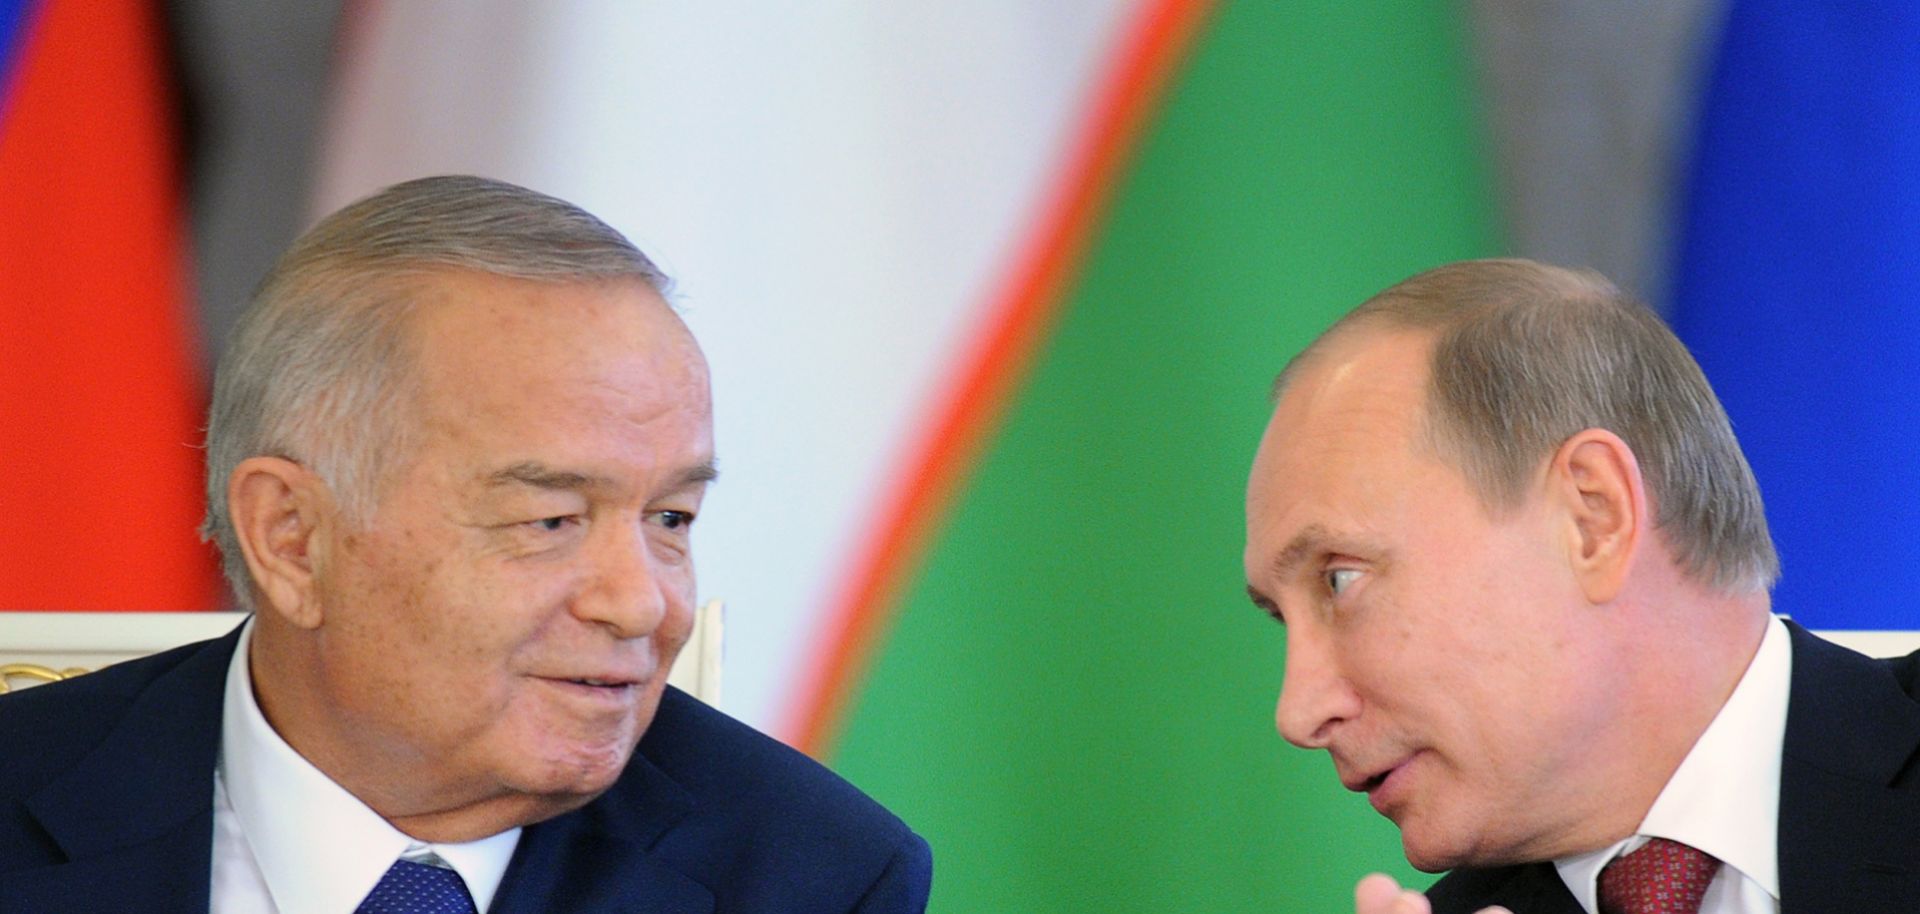 Russian President Vladimir Putin (R) and his Uzbek counterpart Islam Karimov (L) speak in Moscow in 2013. The future of Uzbekistan is not only important to its clans, but also to the greater balance of power in Eurasia.